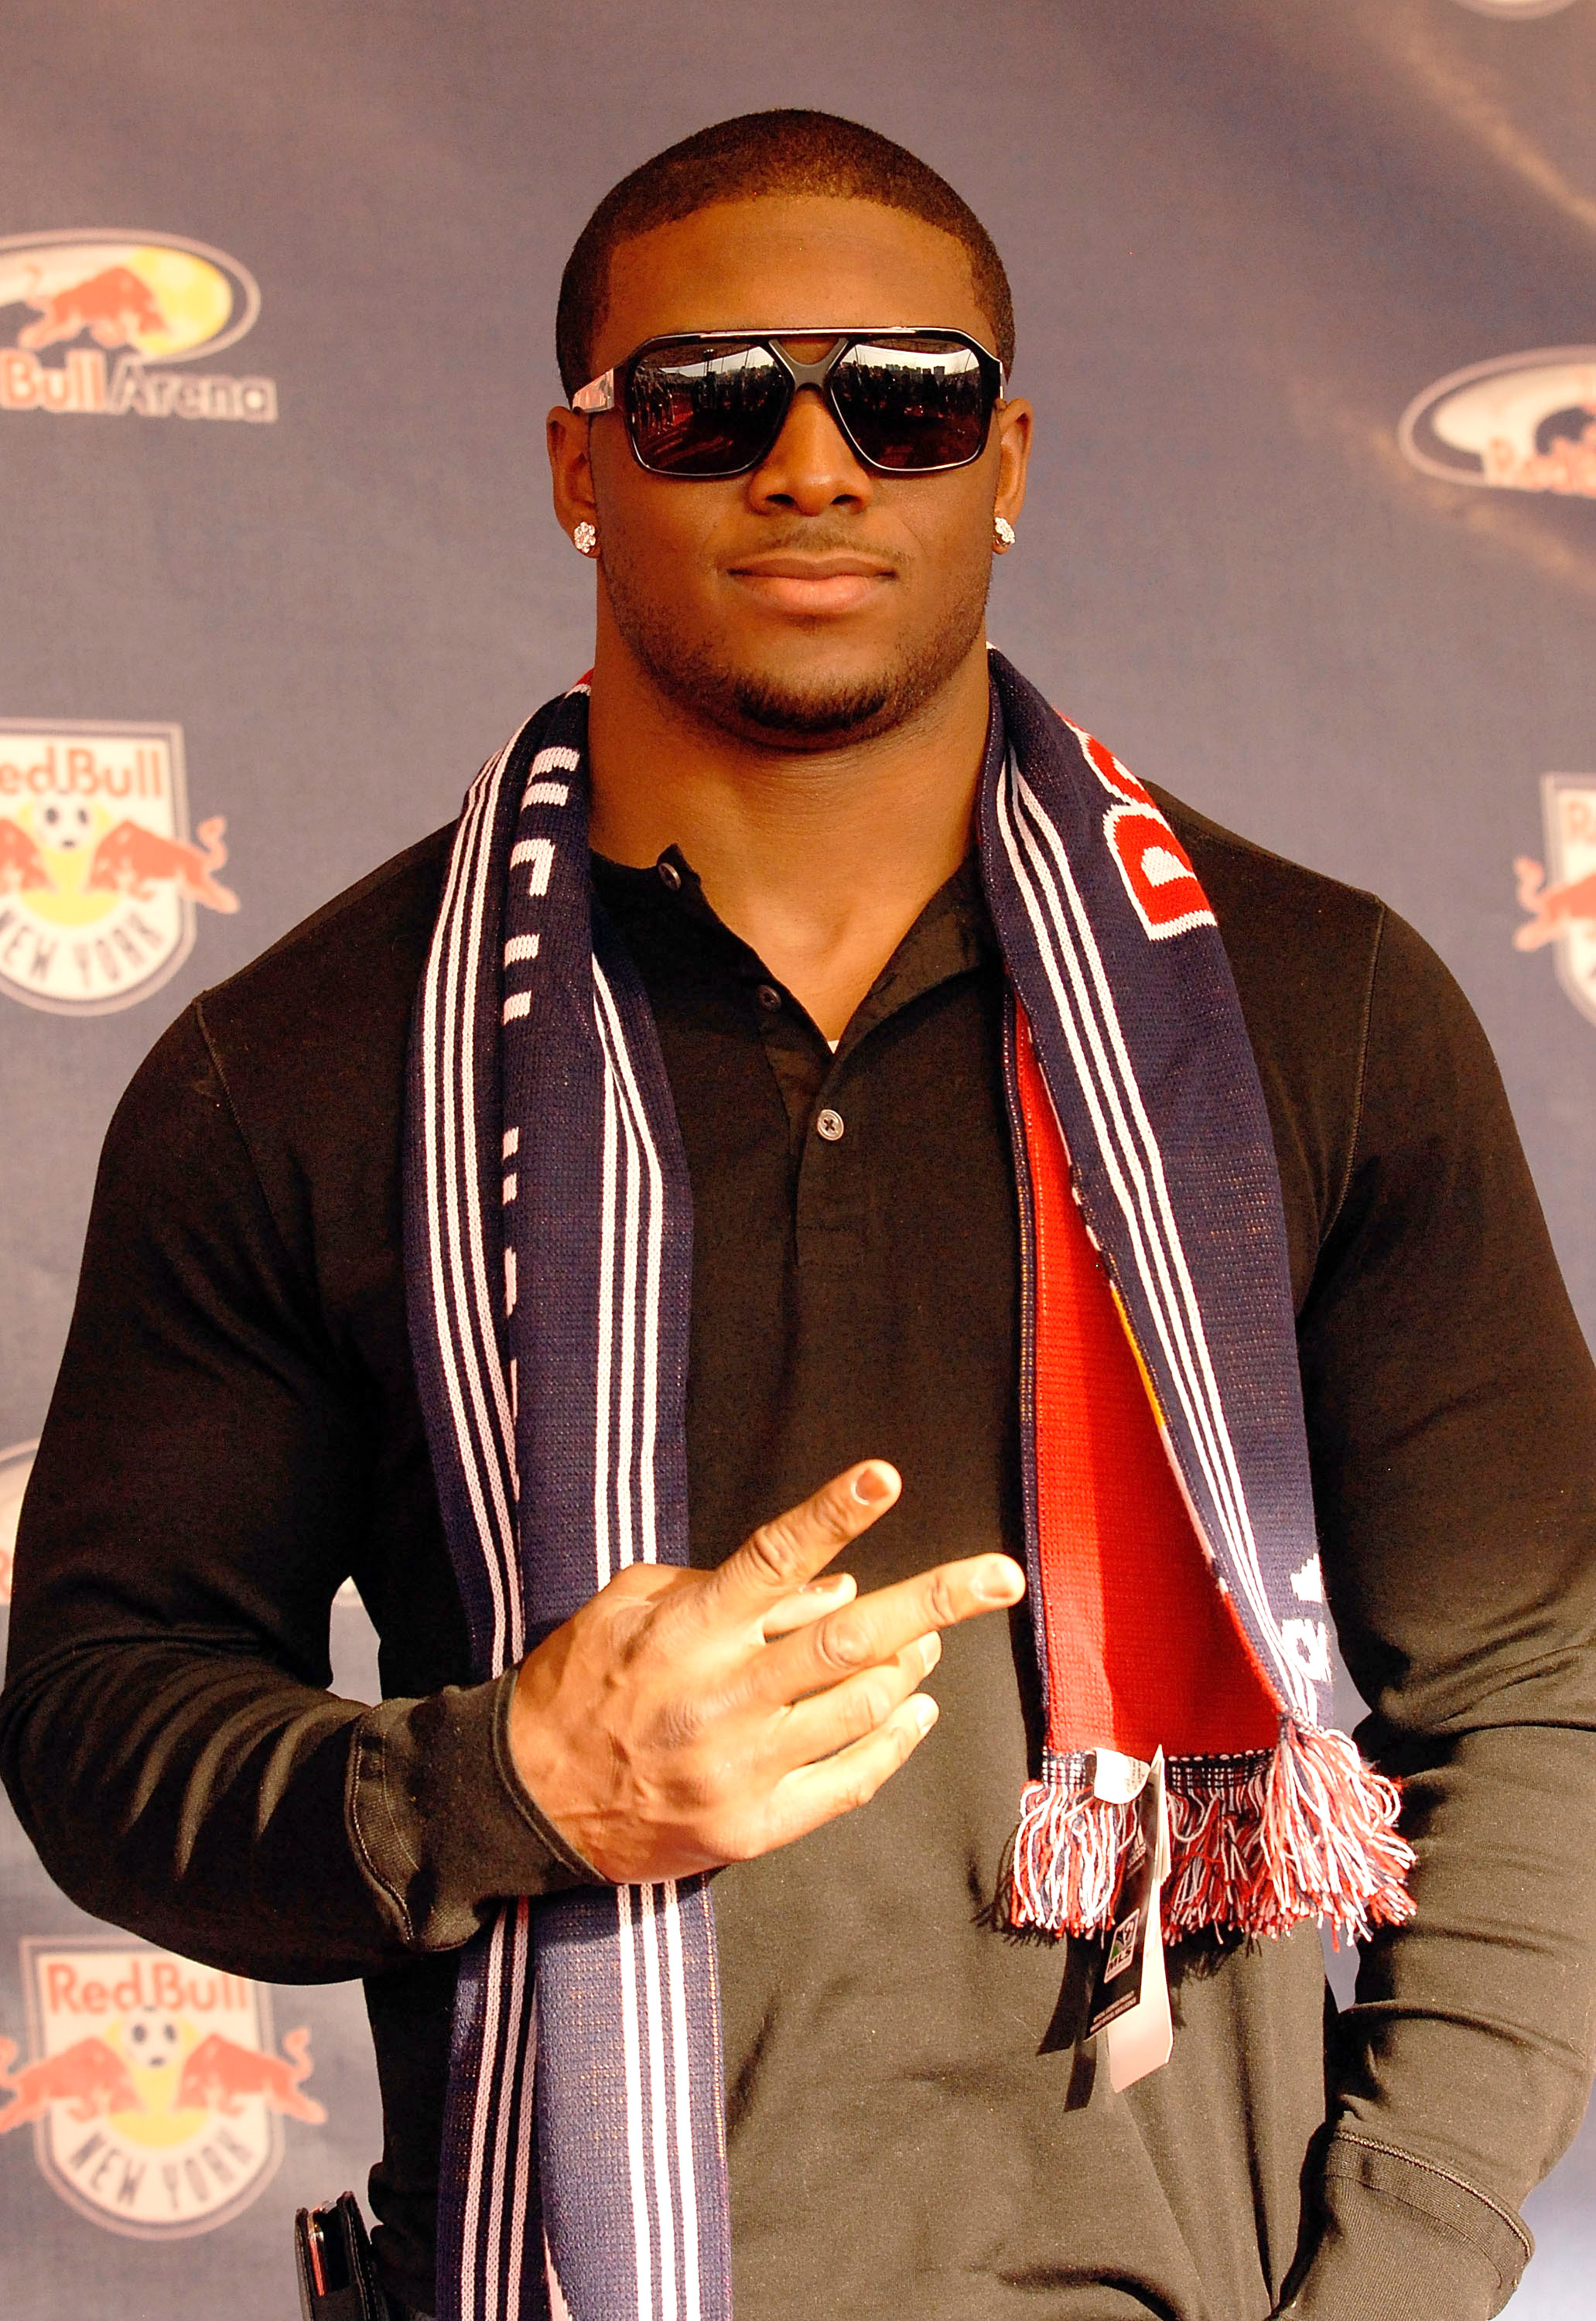 HARRISON, NJ - MARCH 20:  2010 Super Bowl champion Reggie Bush #25 of the New Orleans Saints poses for a photo prior to a match between the New York Red Bulls and Santos FC at the first match to be played at Red Bull Arena on March 20, 2010 in Harrison, N